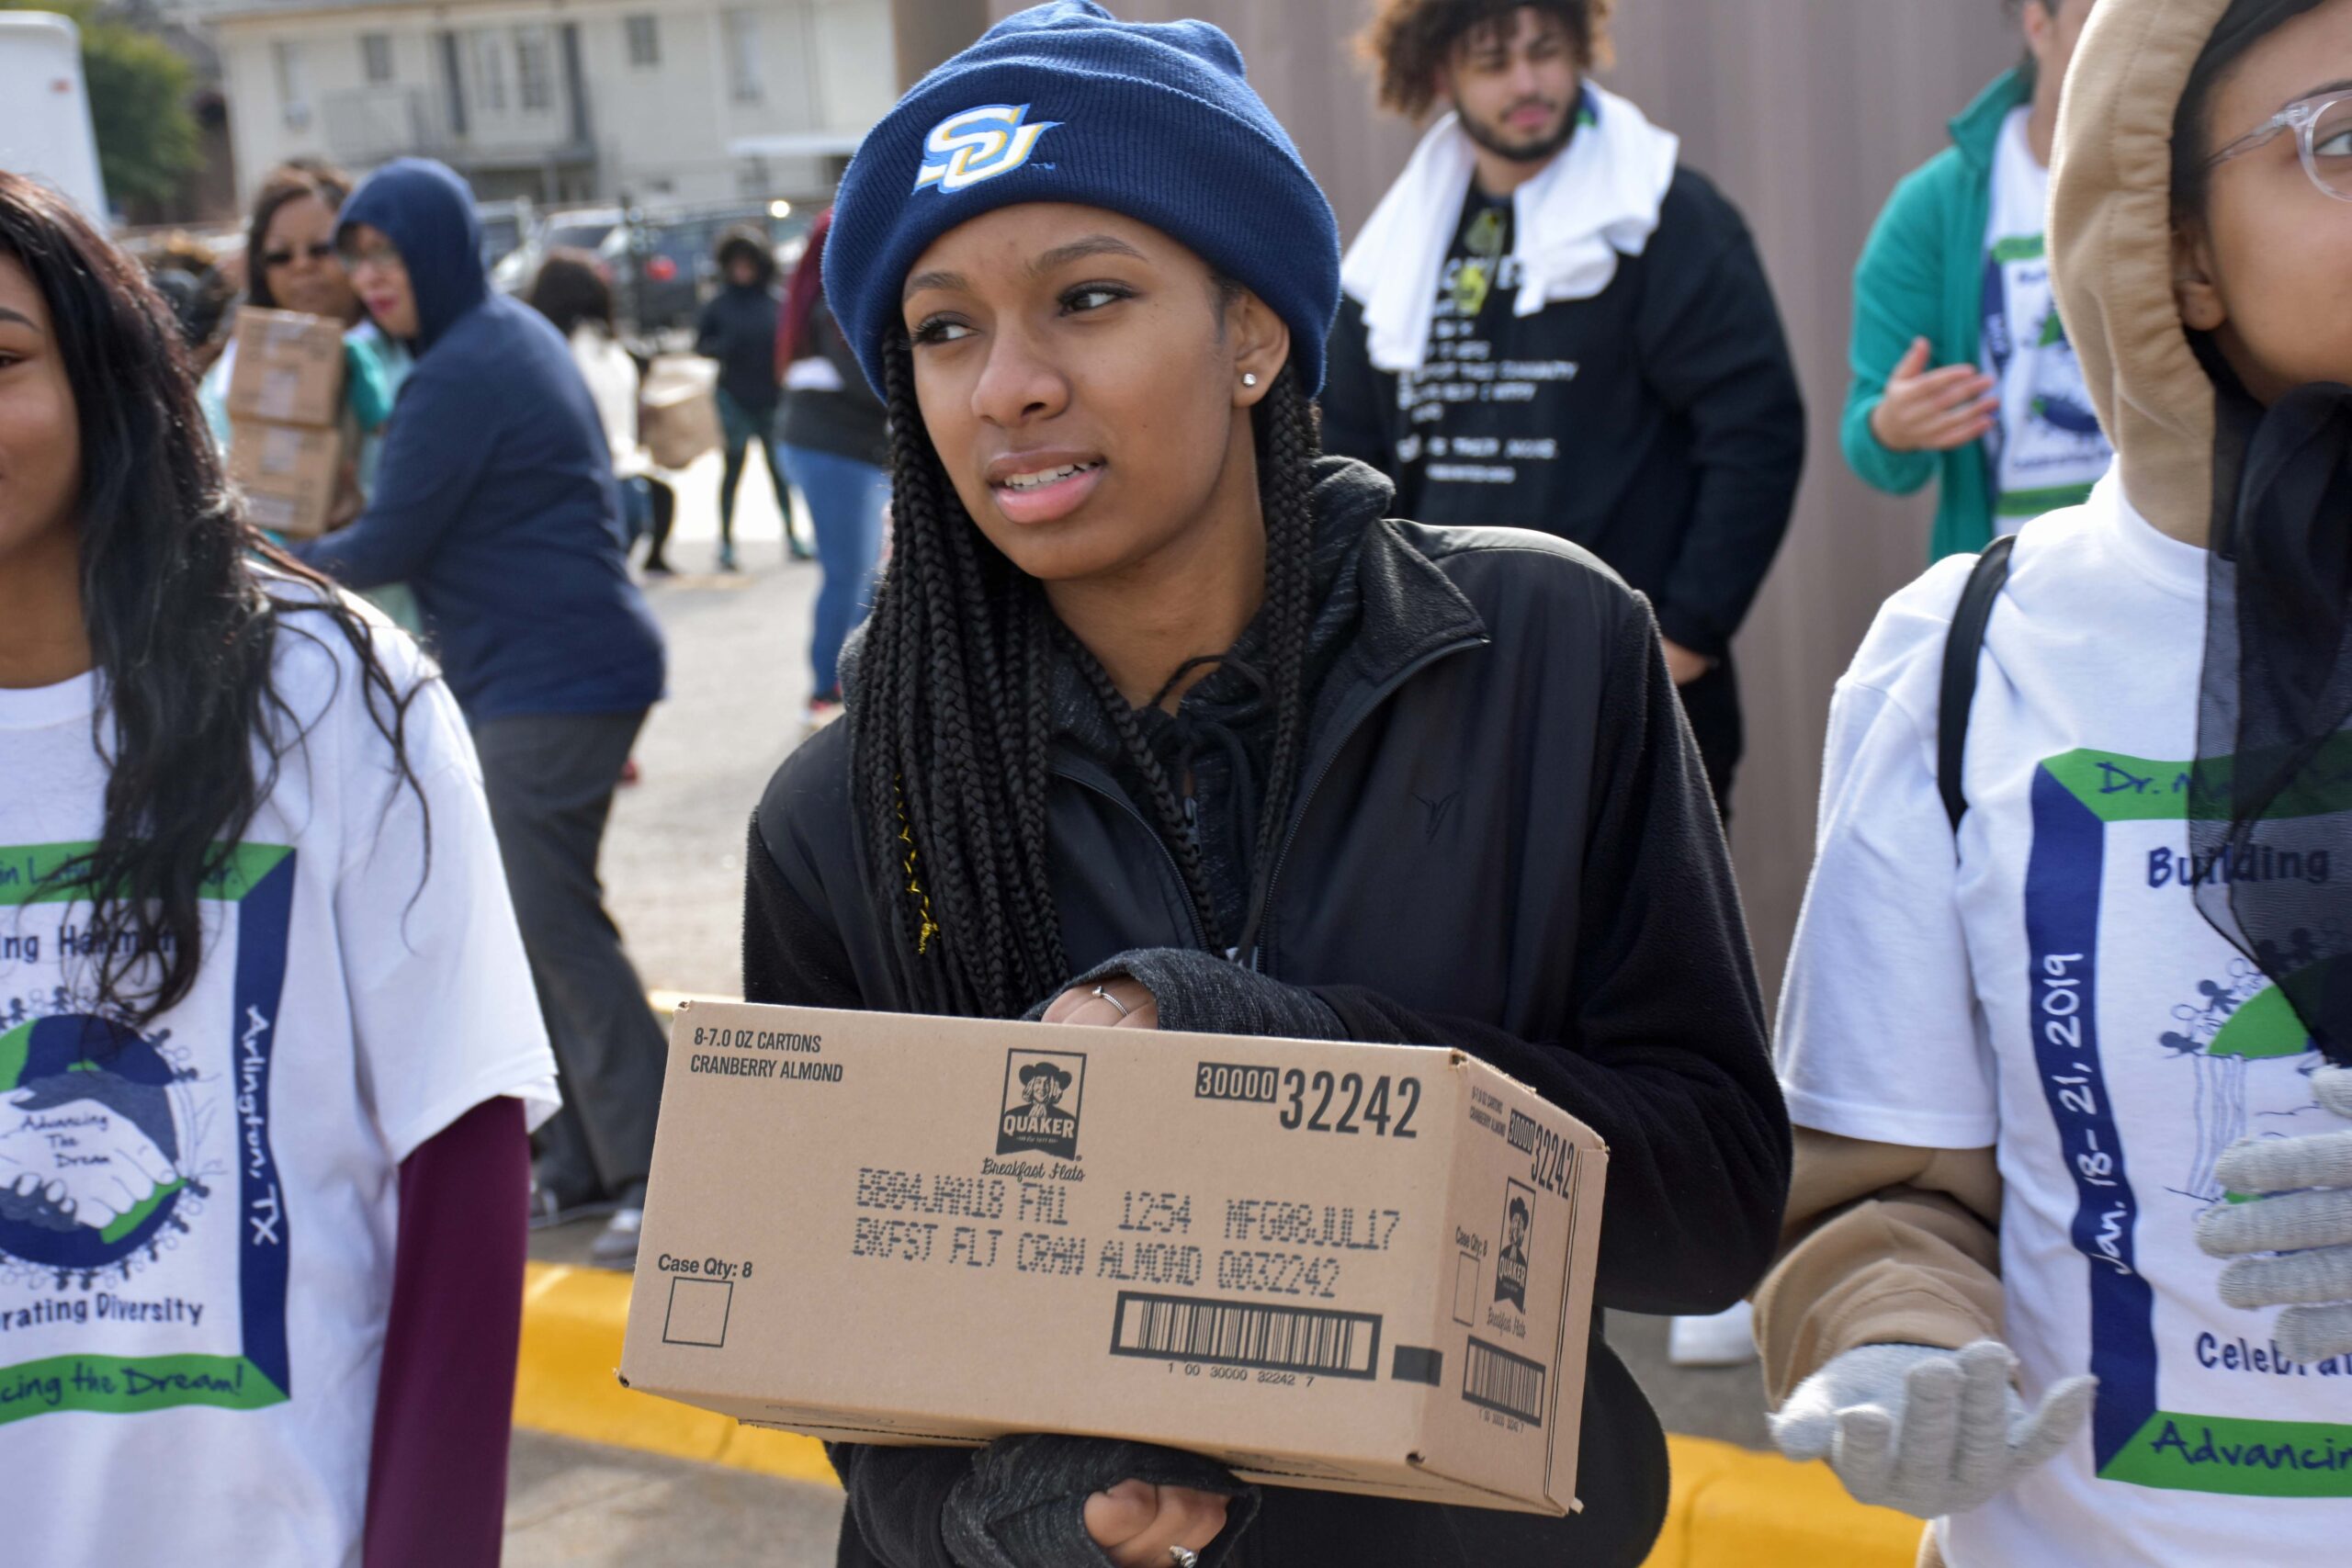 Martin Luther King Jr. "Day of Service" 2019 at Mission Arlington